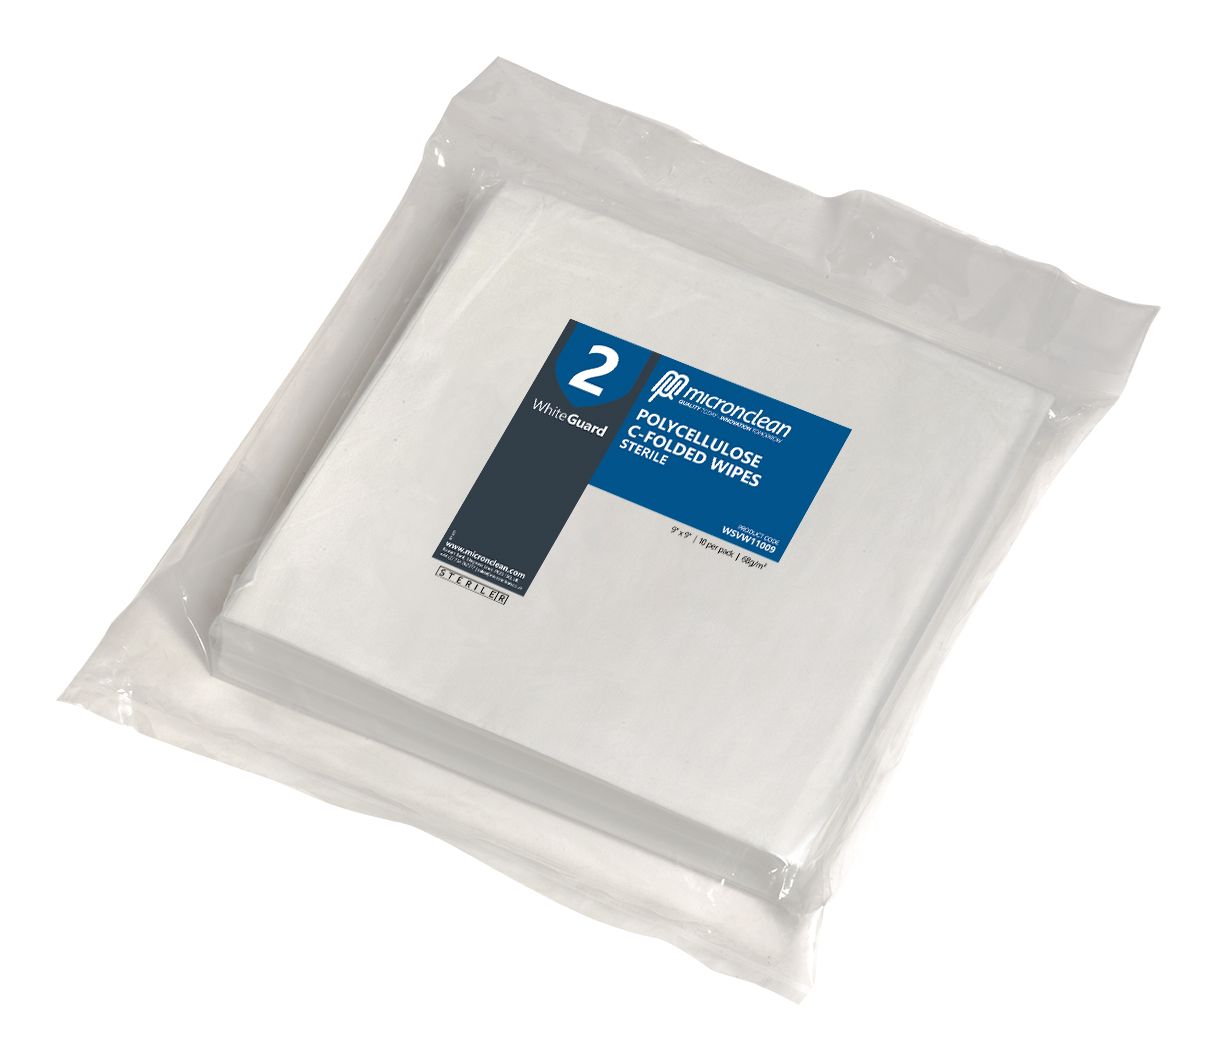 WhiteGuard 2 Polycellulose C-folded Wipes Sterile [IN]